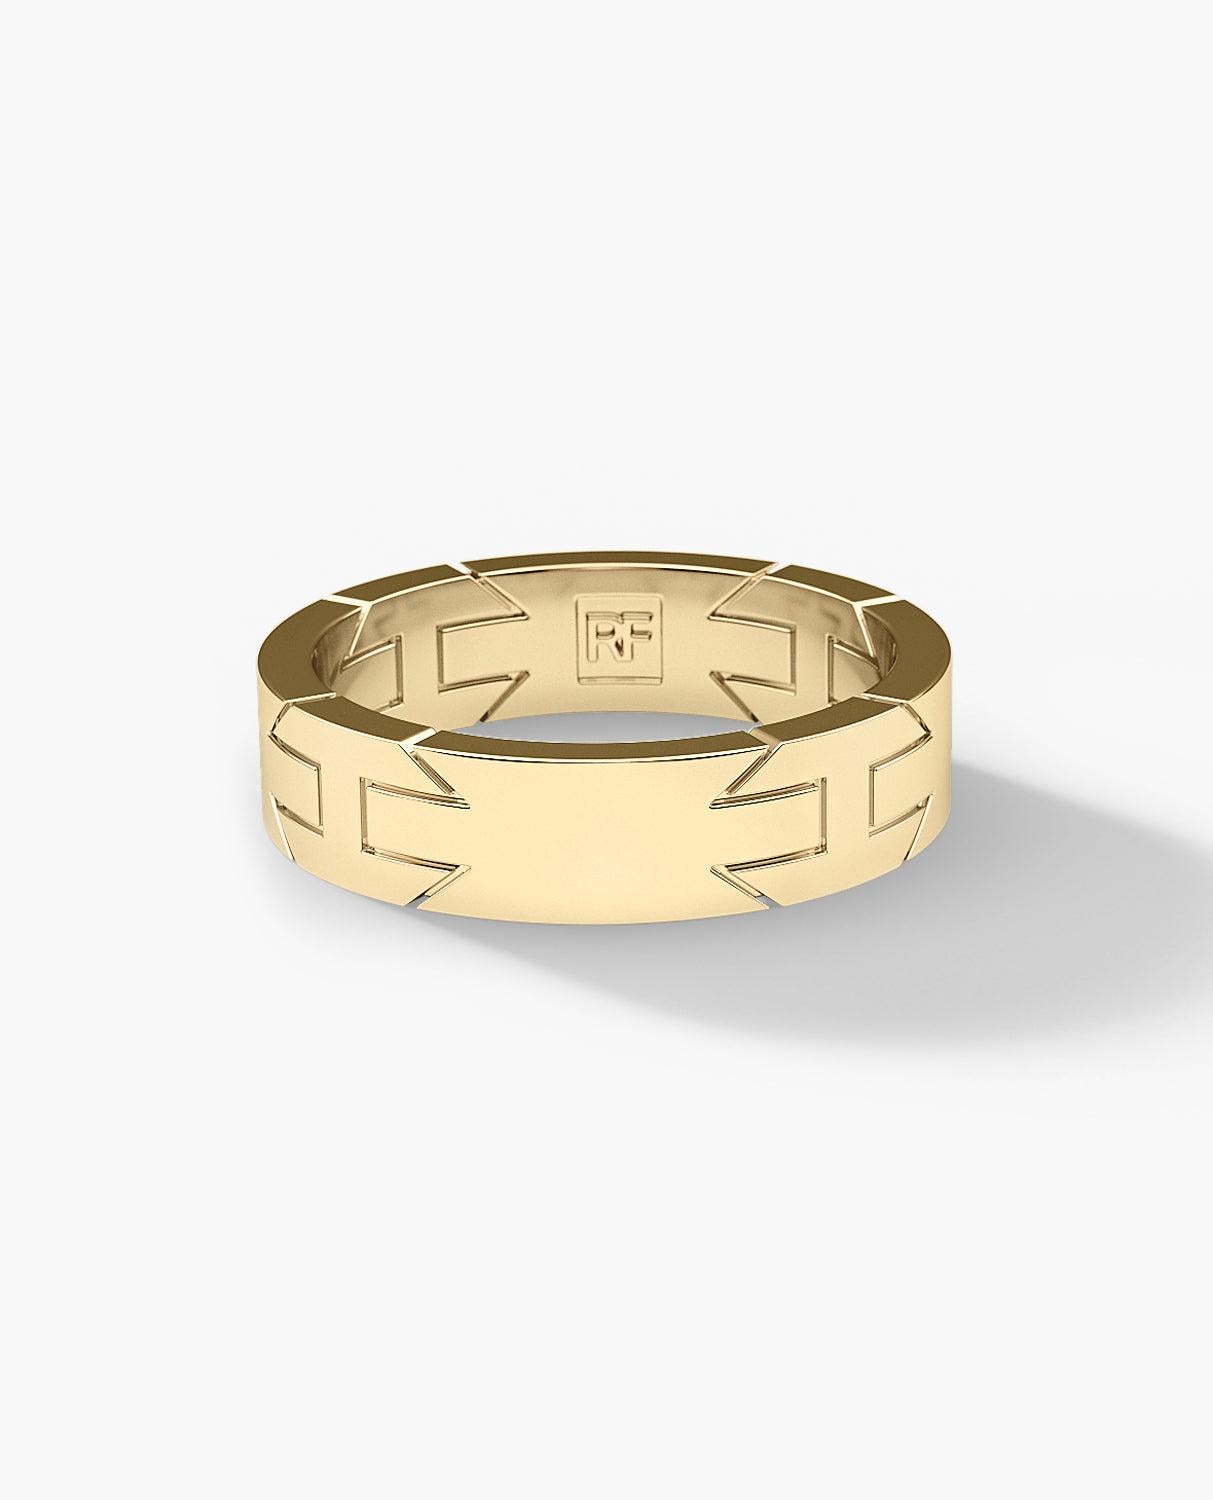 Contemporary BRIGGS 14k Yellow Gold Ring